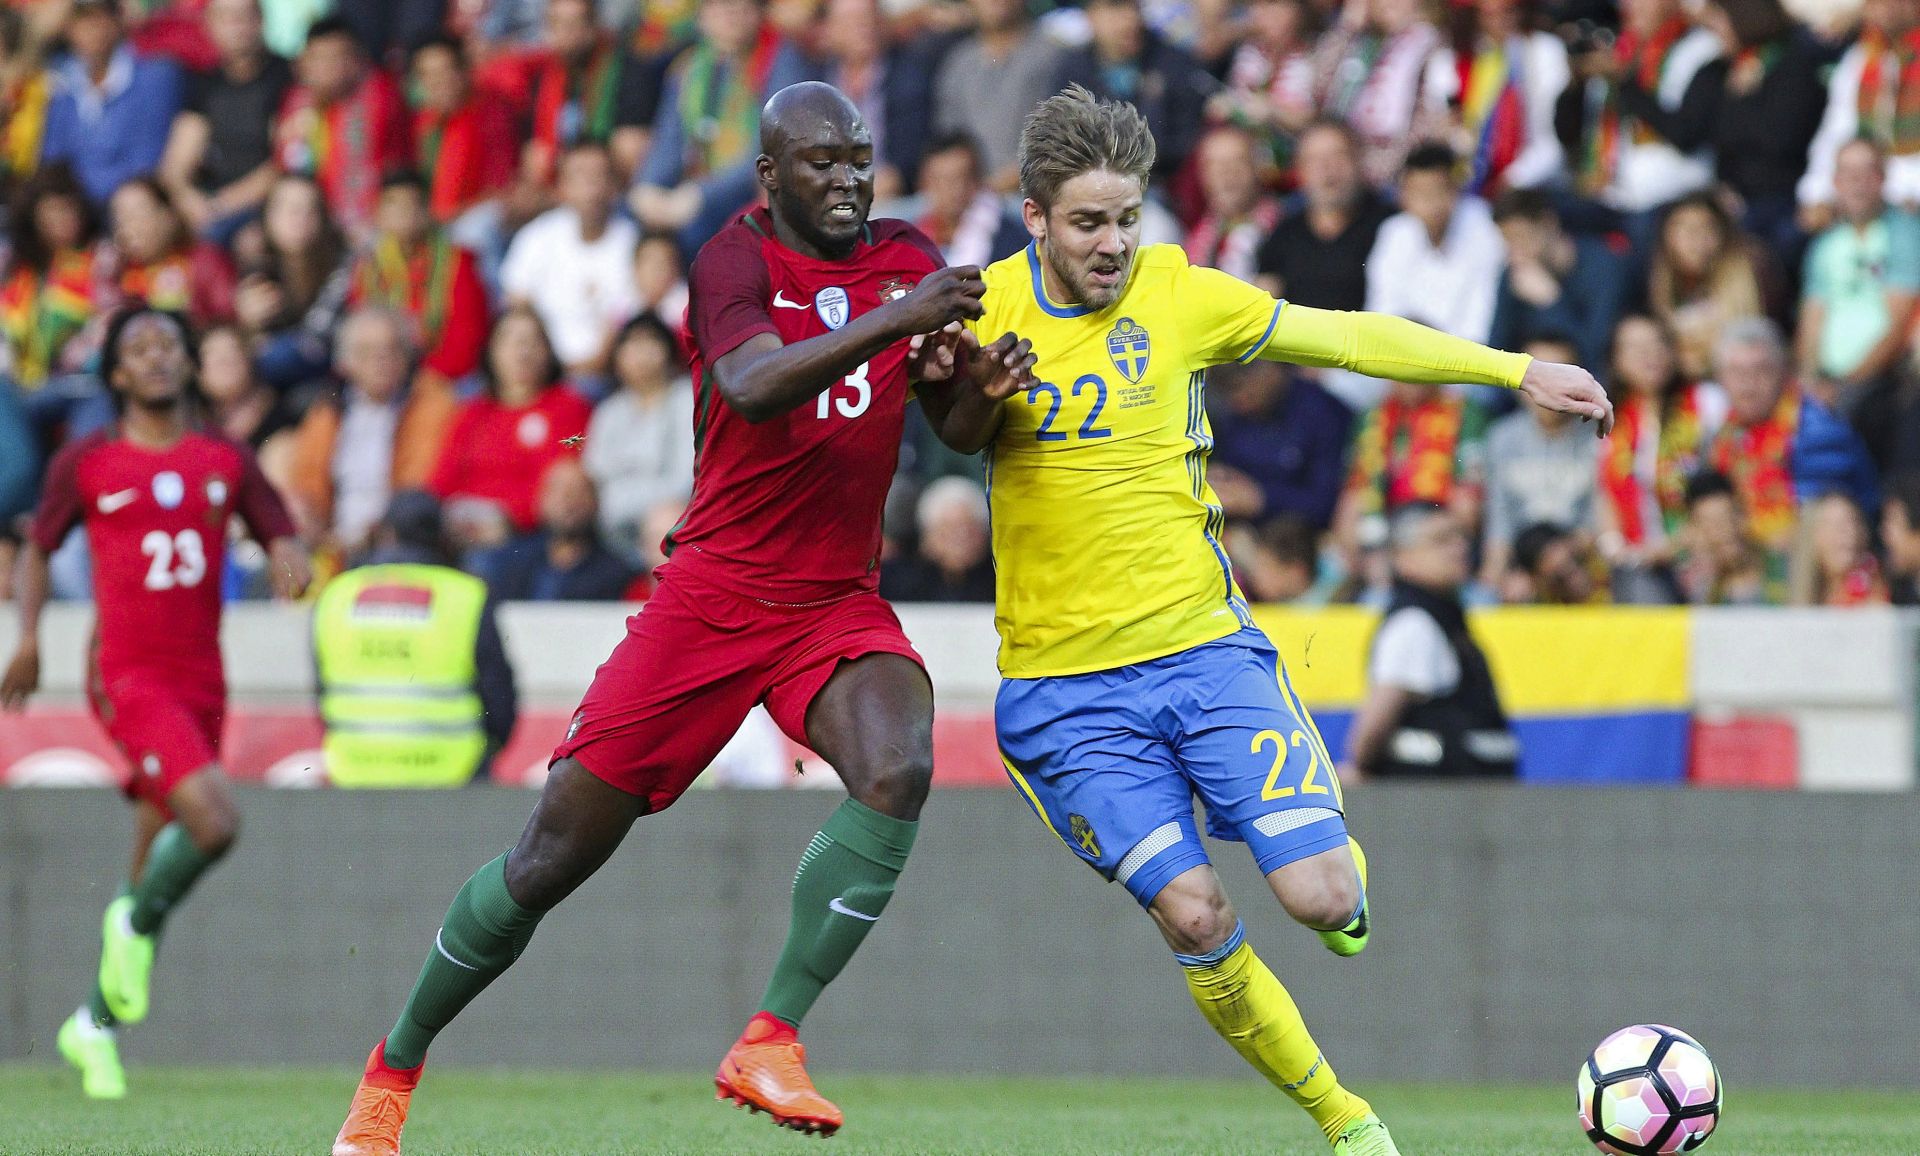 epa05875894 Danilo Pereira (L) of Portugal fights for the ball with Christoffer Nyman of Sweden during an international friendly soccer match between Portugal and Sweden at Barreiros Stadium in Funchal, Madeira Island, Portugal, 28 March 2017.  EPA/GREGORIO CUNHA